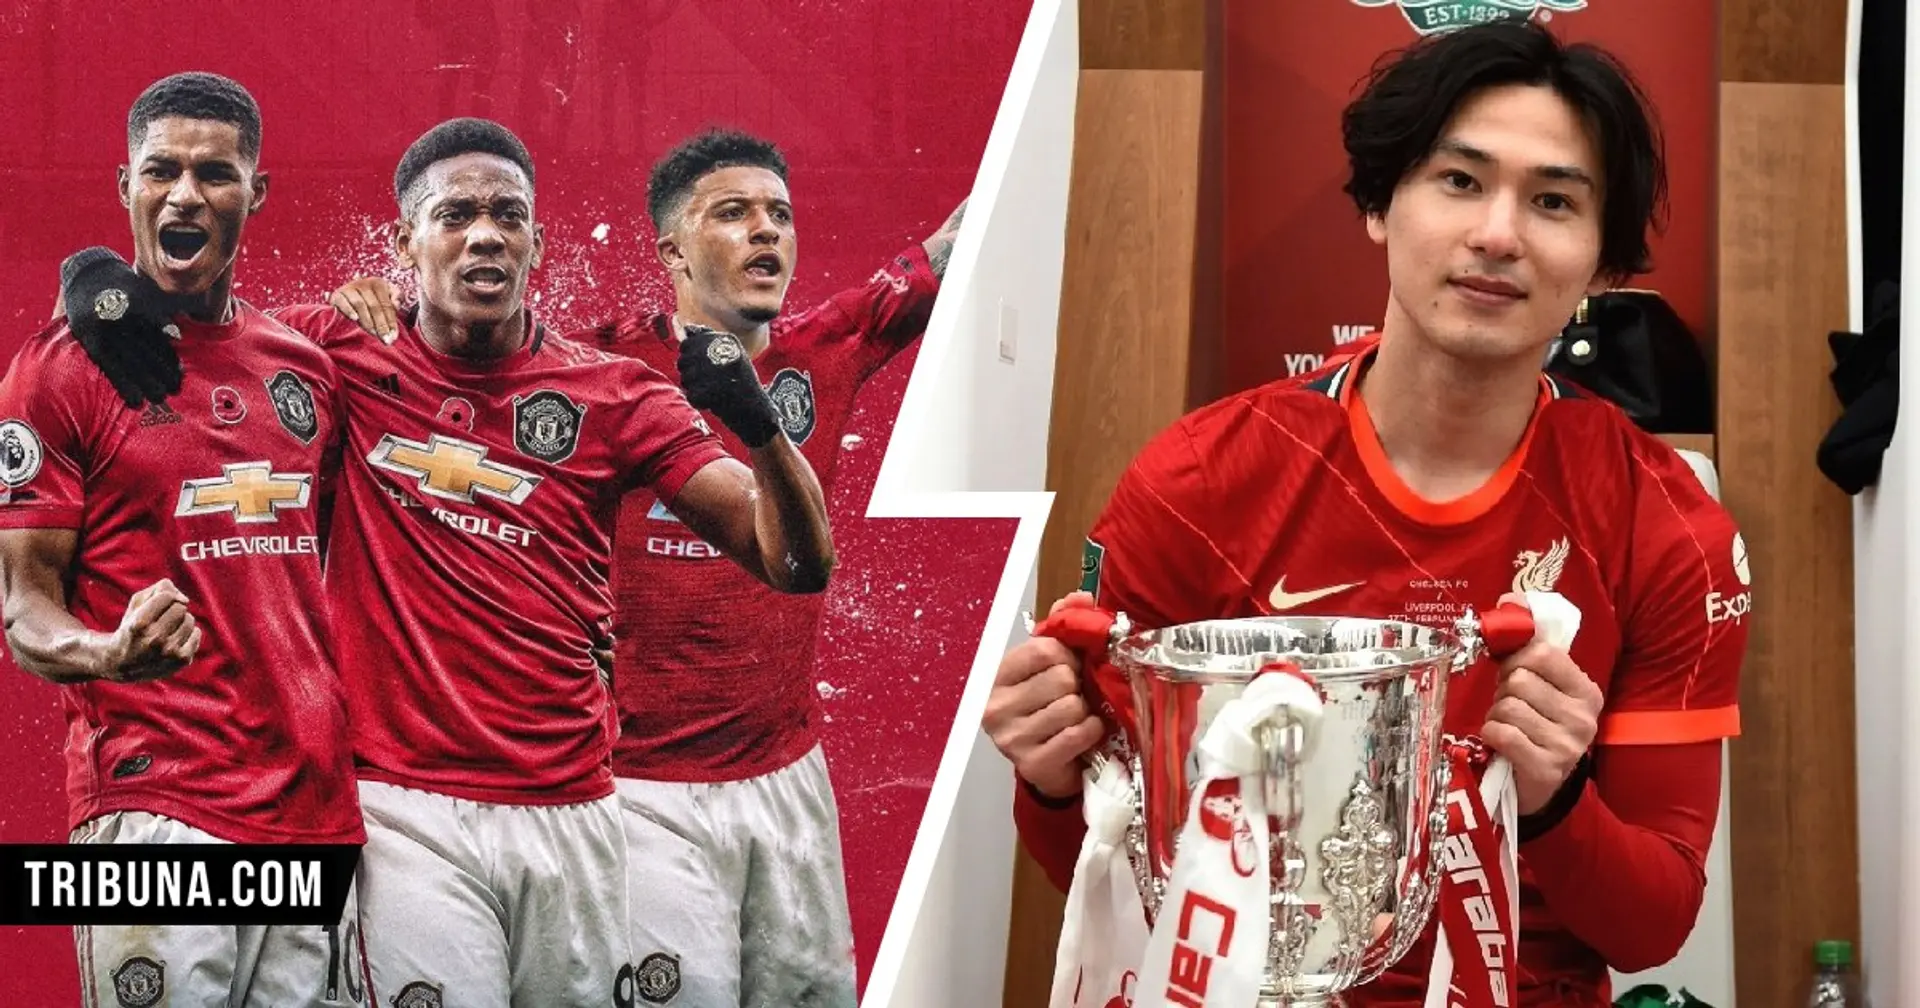 Man Utd fan claims they have 'best front three in Europe' - Liverpool fan shuts them down with epic reply